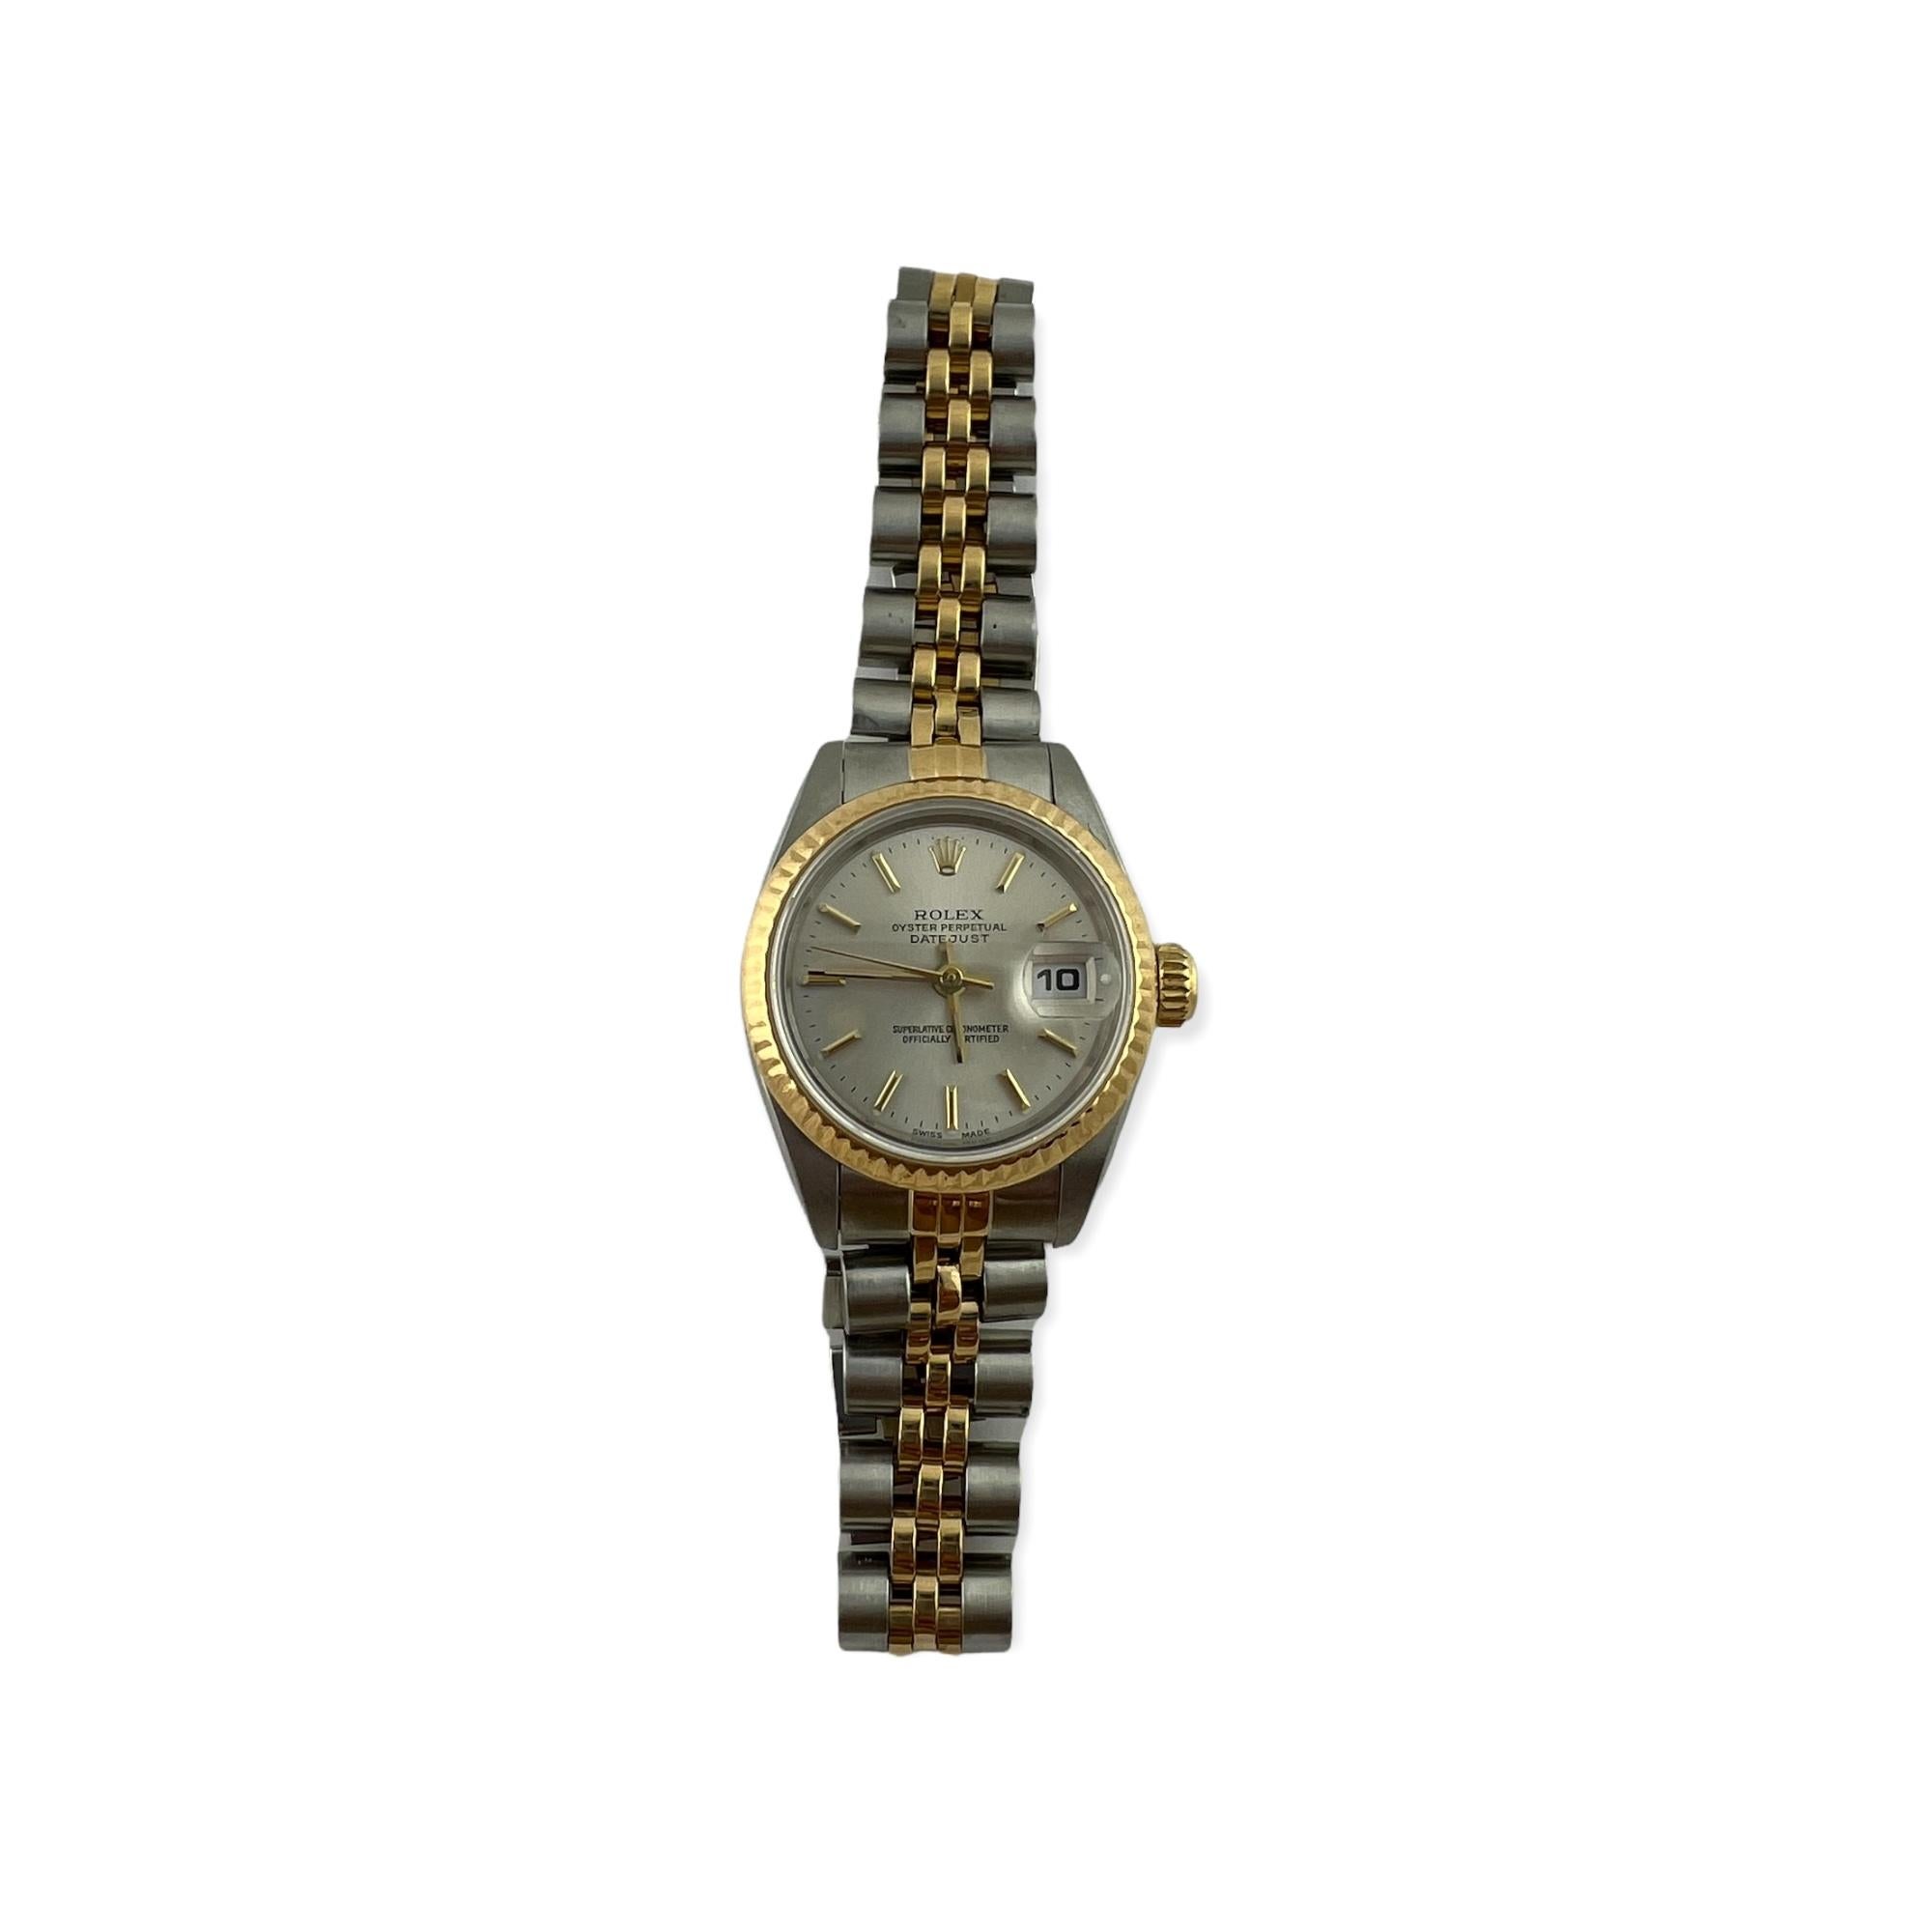 1984 Rolex Ladies Two Tone Datejust Watch

Model: 69173
Serial: 8536497

This classic Ladies Rolex is set in stainless steel and yellow gold

Case is 26mm without the crown

Silver dial with gold stick markers

Jubilee band fits up to 7.5